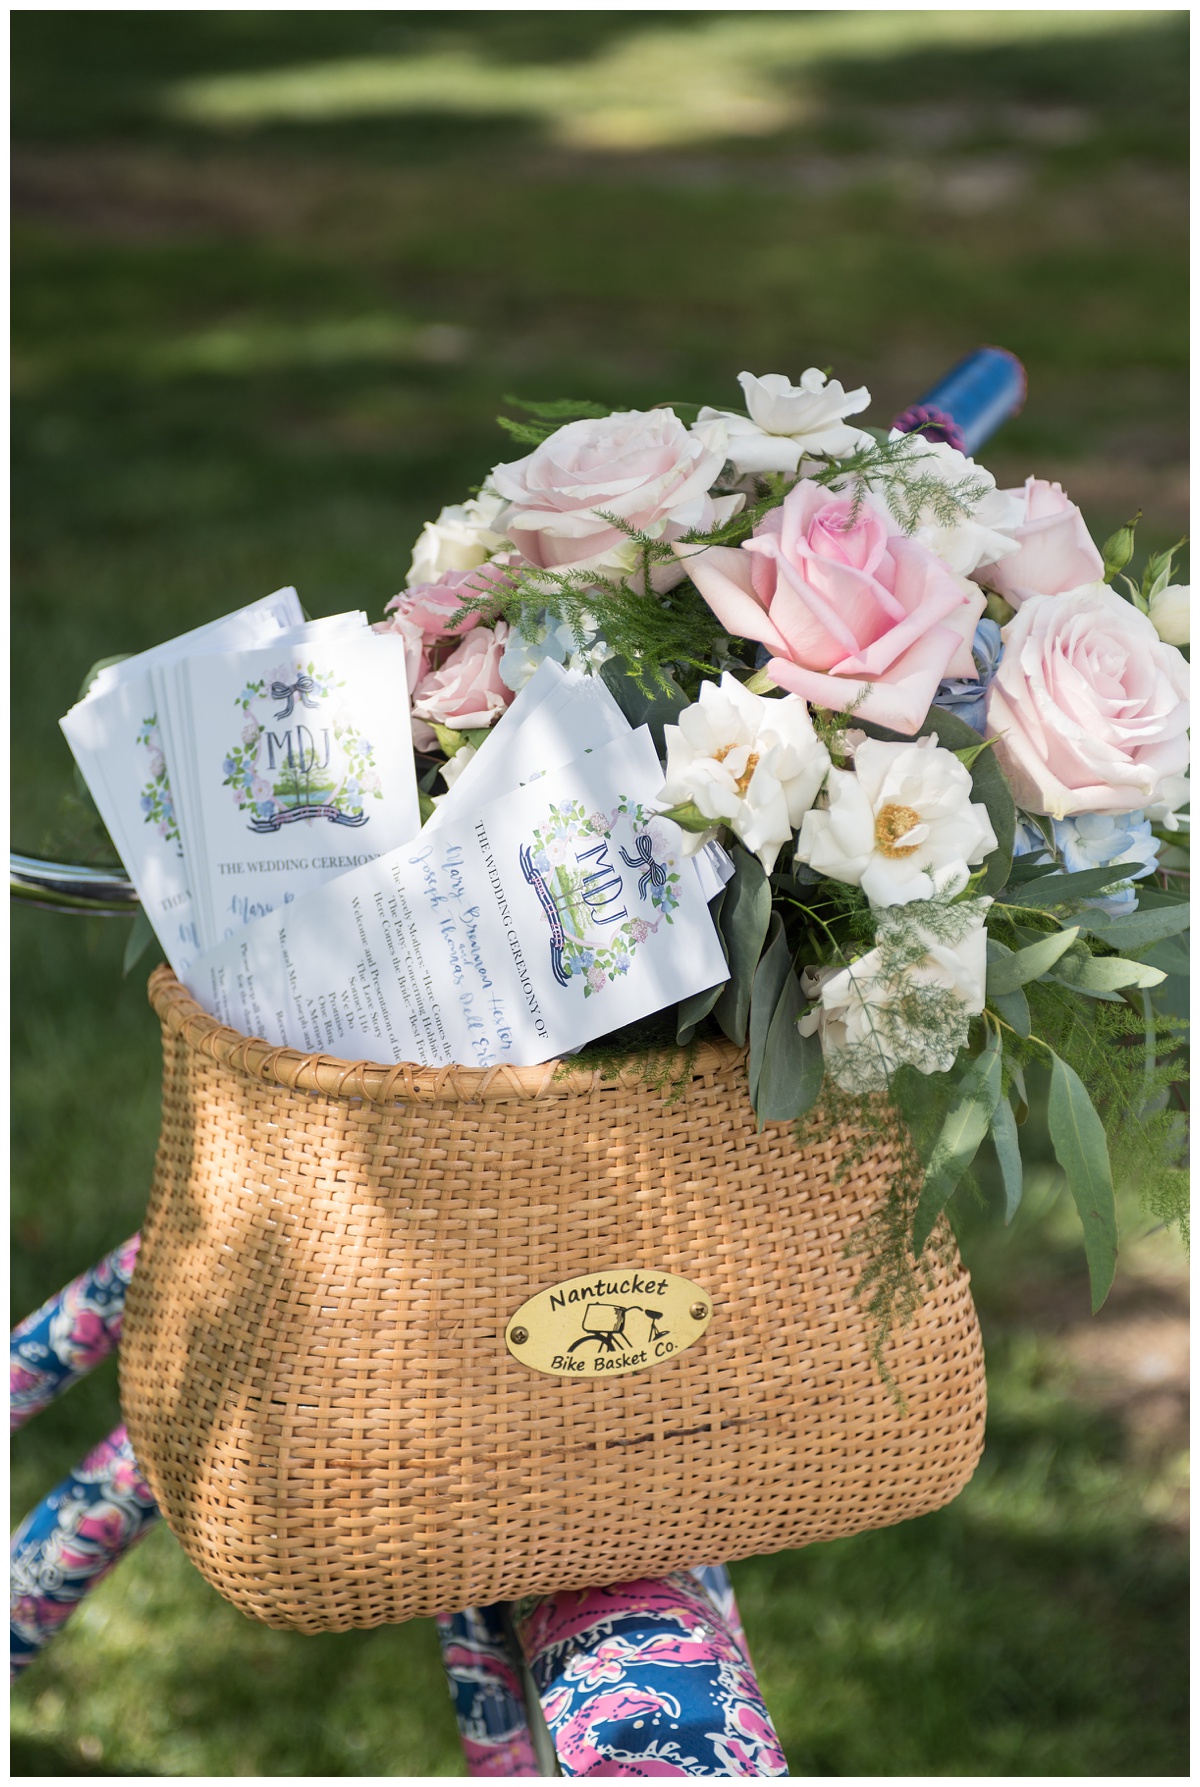 pink and blue beach cruiser bike with nantucket bike basket of flowers and wedding day schedule - guest itinerary at outdoor ceremony in june on maryland's eastern shore - now featured on My Eastern Shore Wedding - rustic beach nautical wedding inspo for couples on the eastern shore and chesapeake bay area